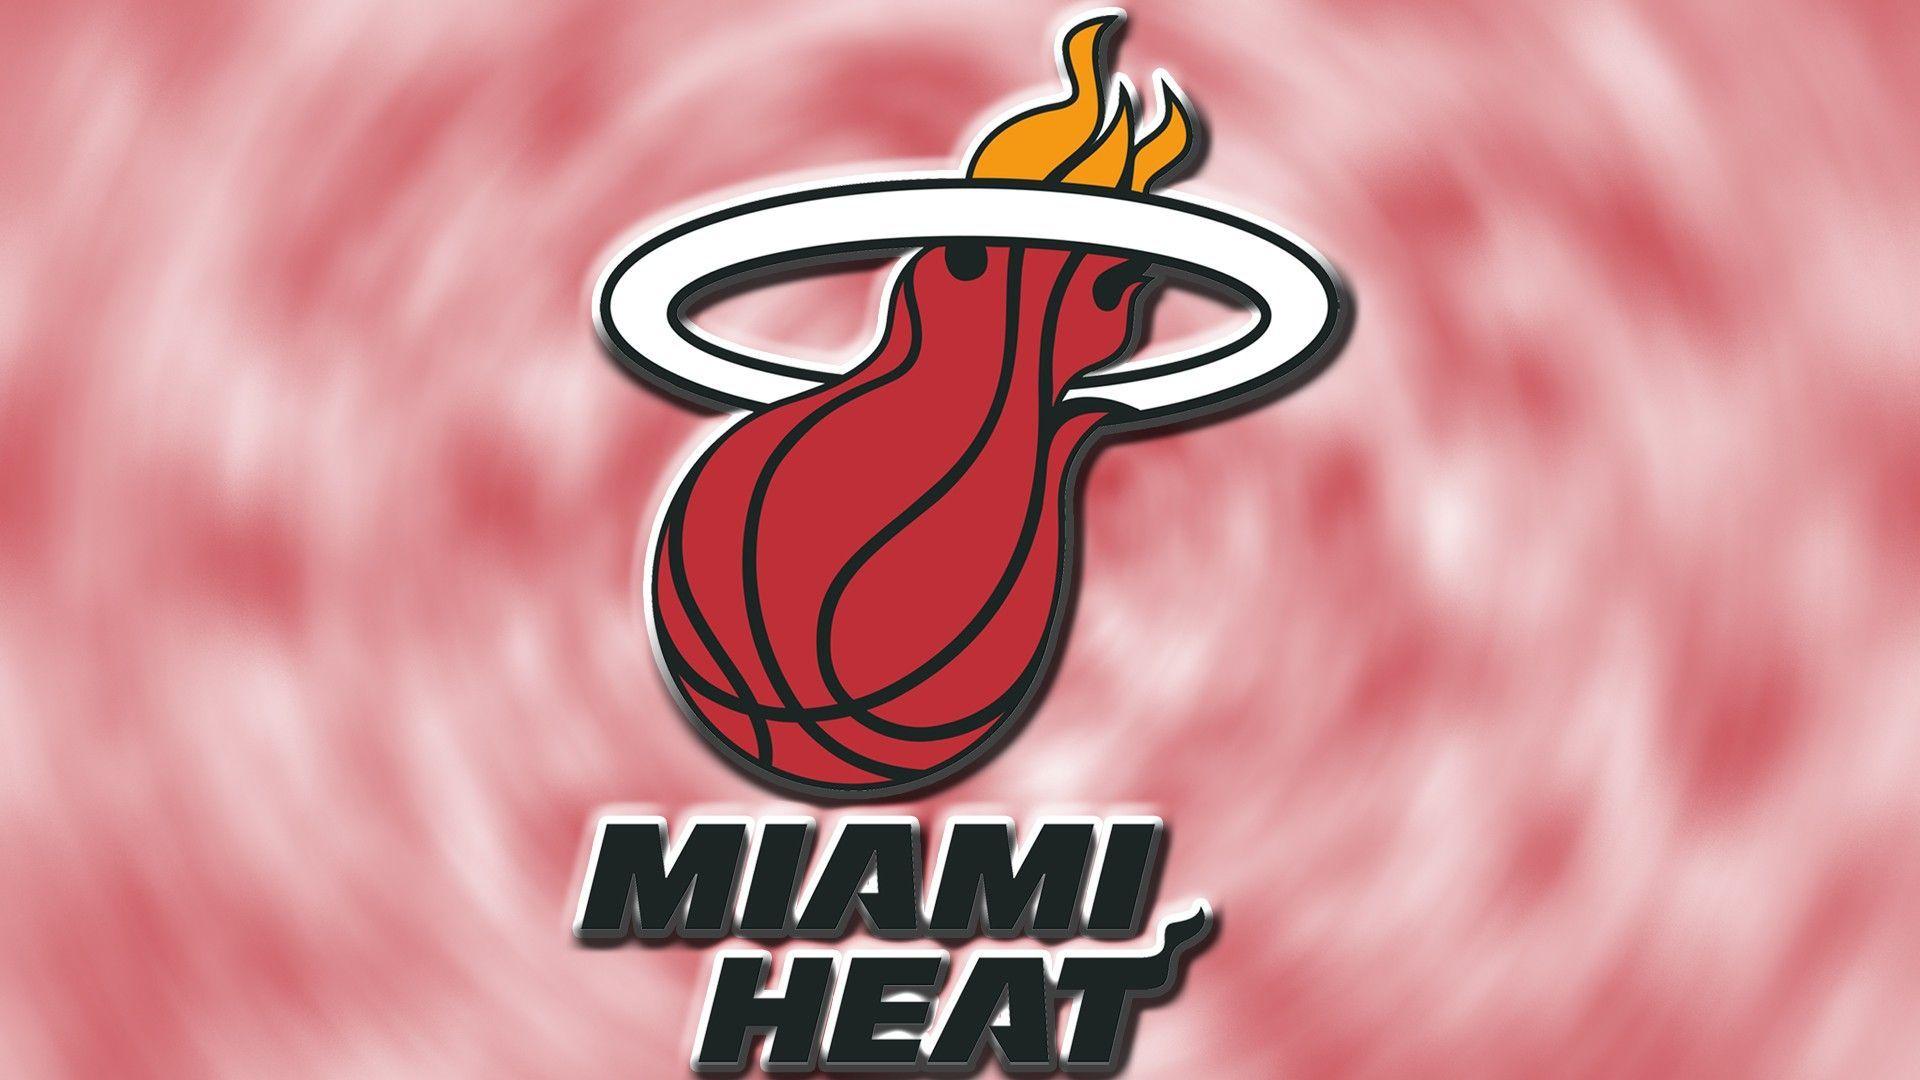 Outstanding Red Logo Miami Heat in Blur Abstract Background HD